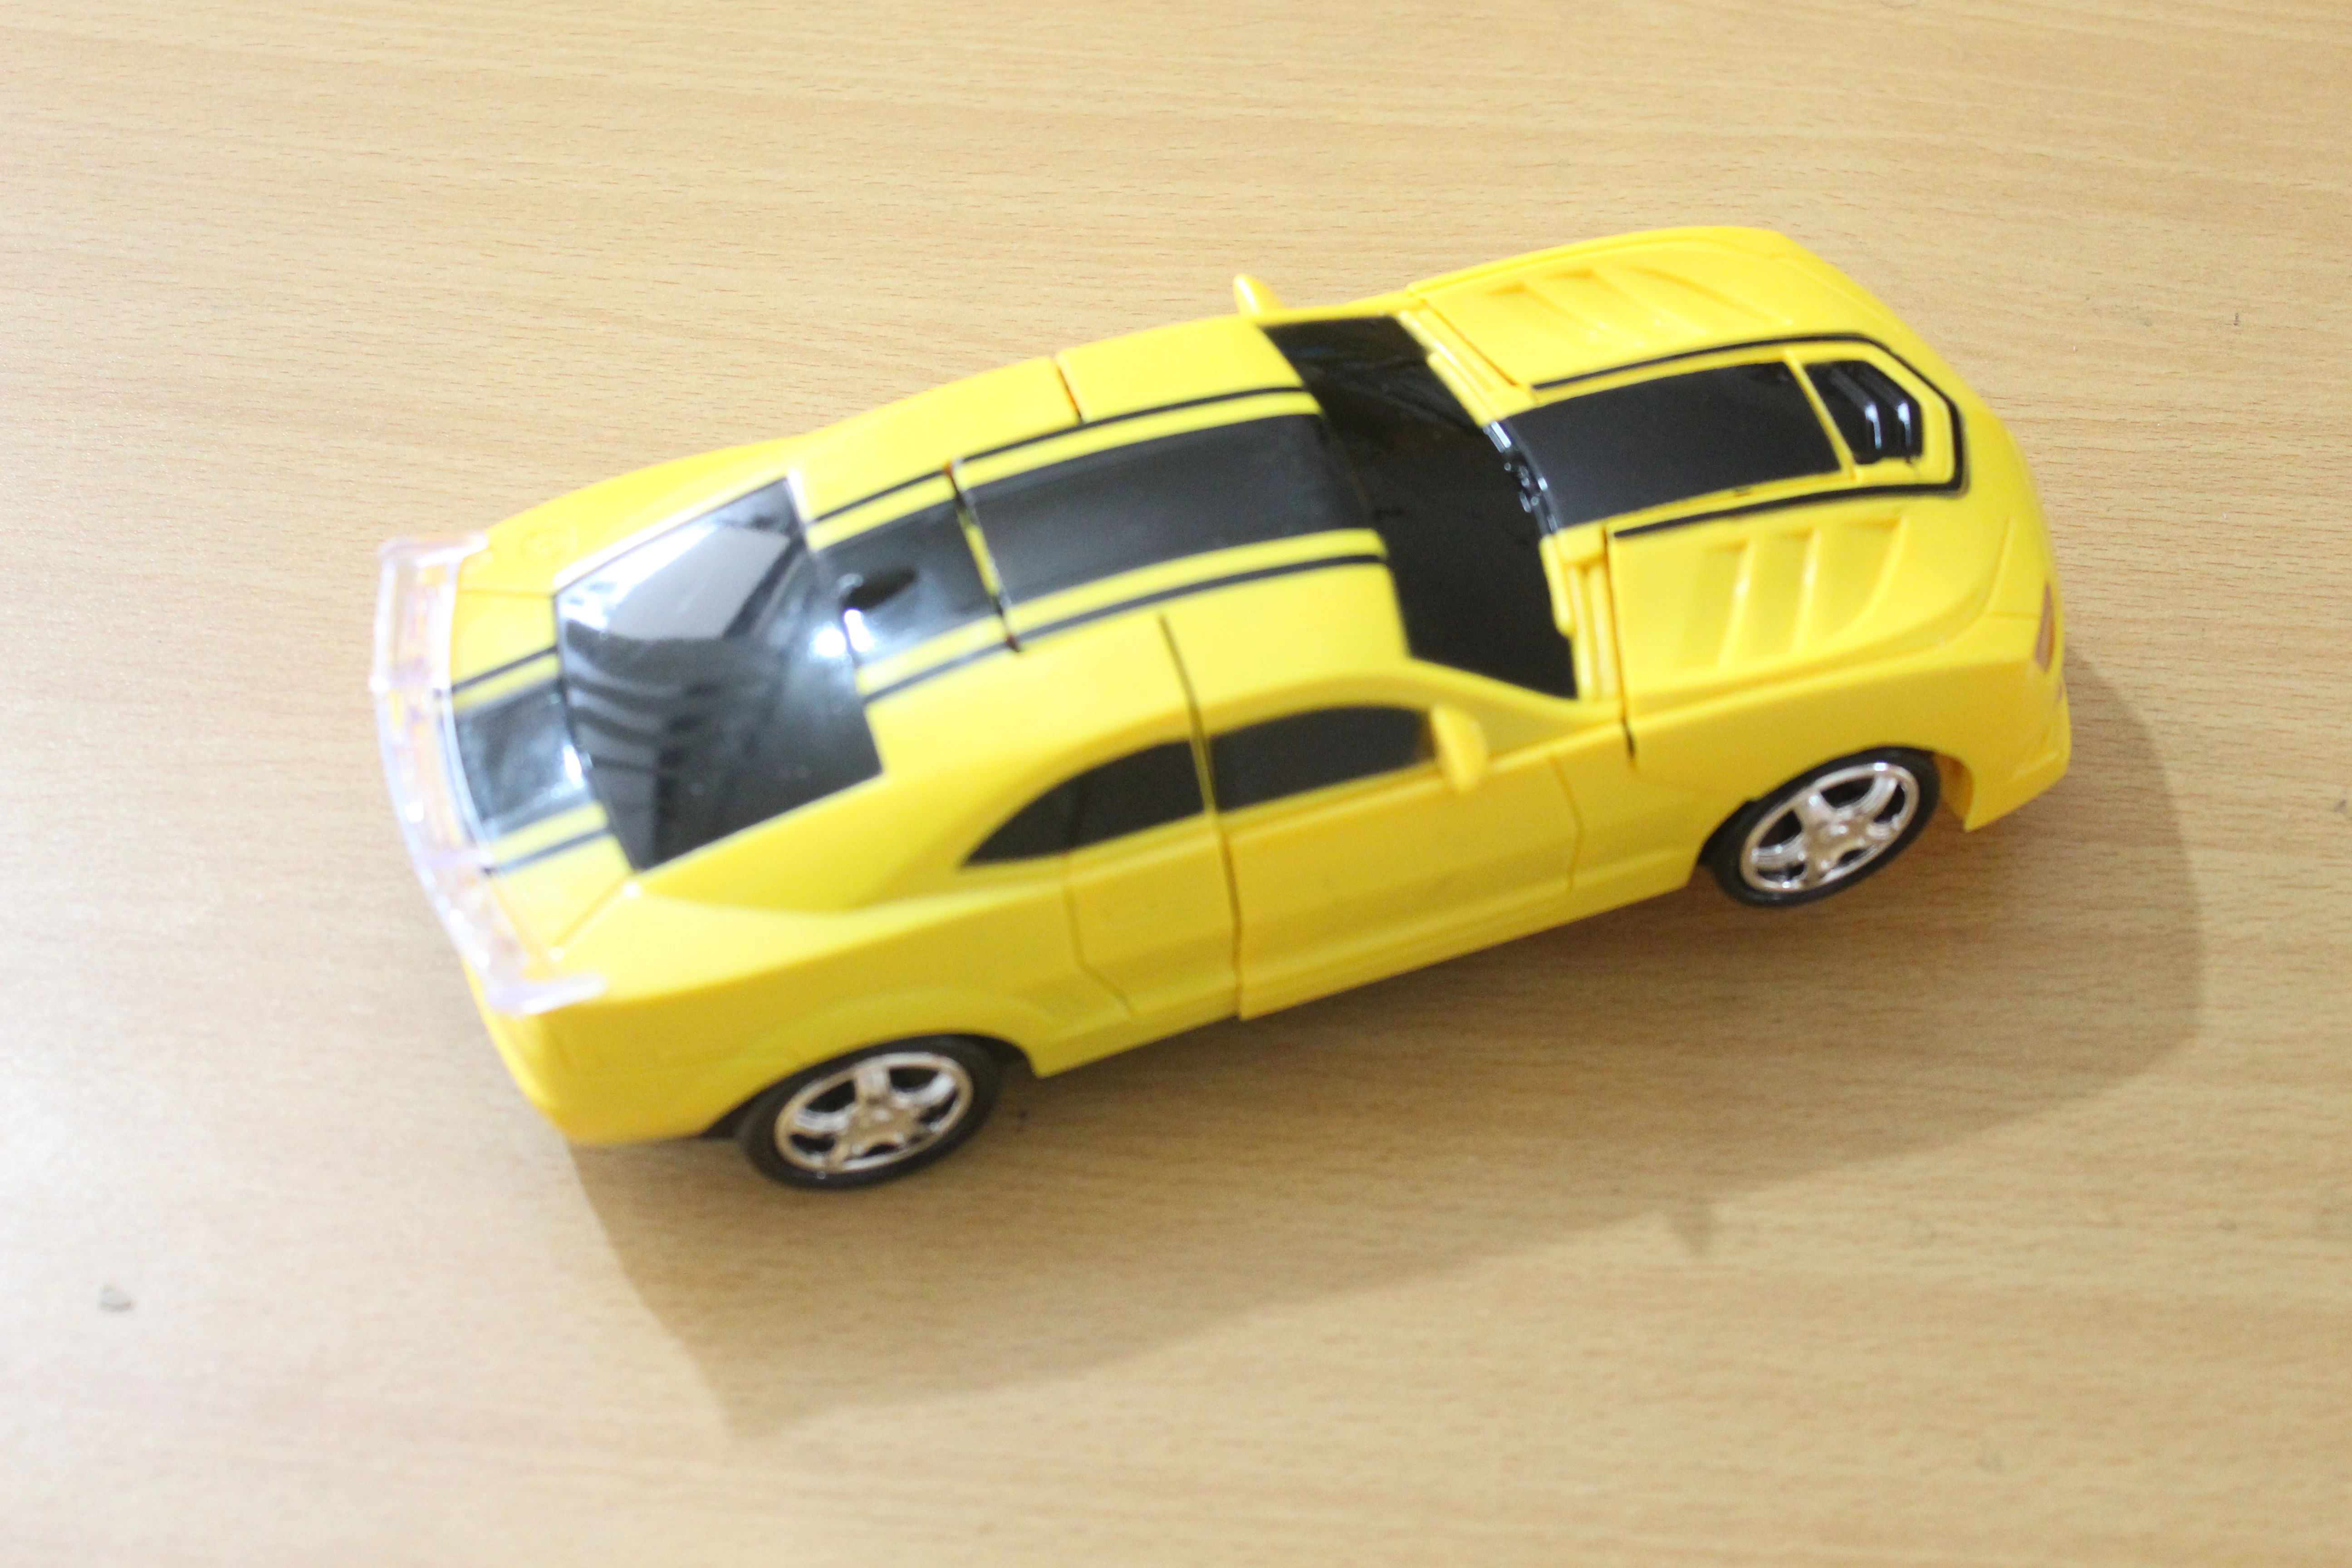 Sports car for toy - Yellow color